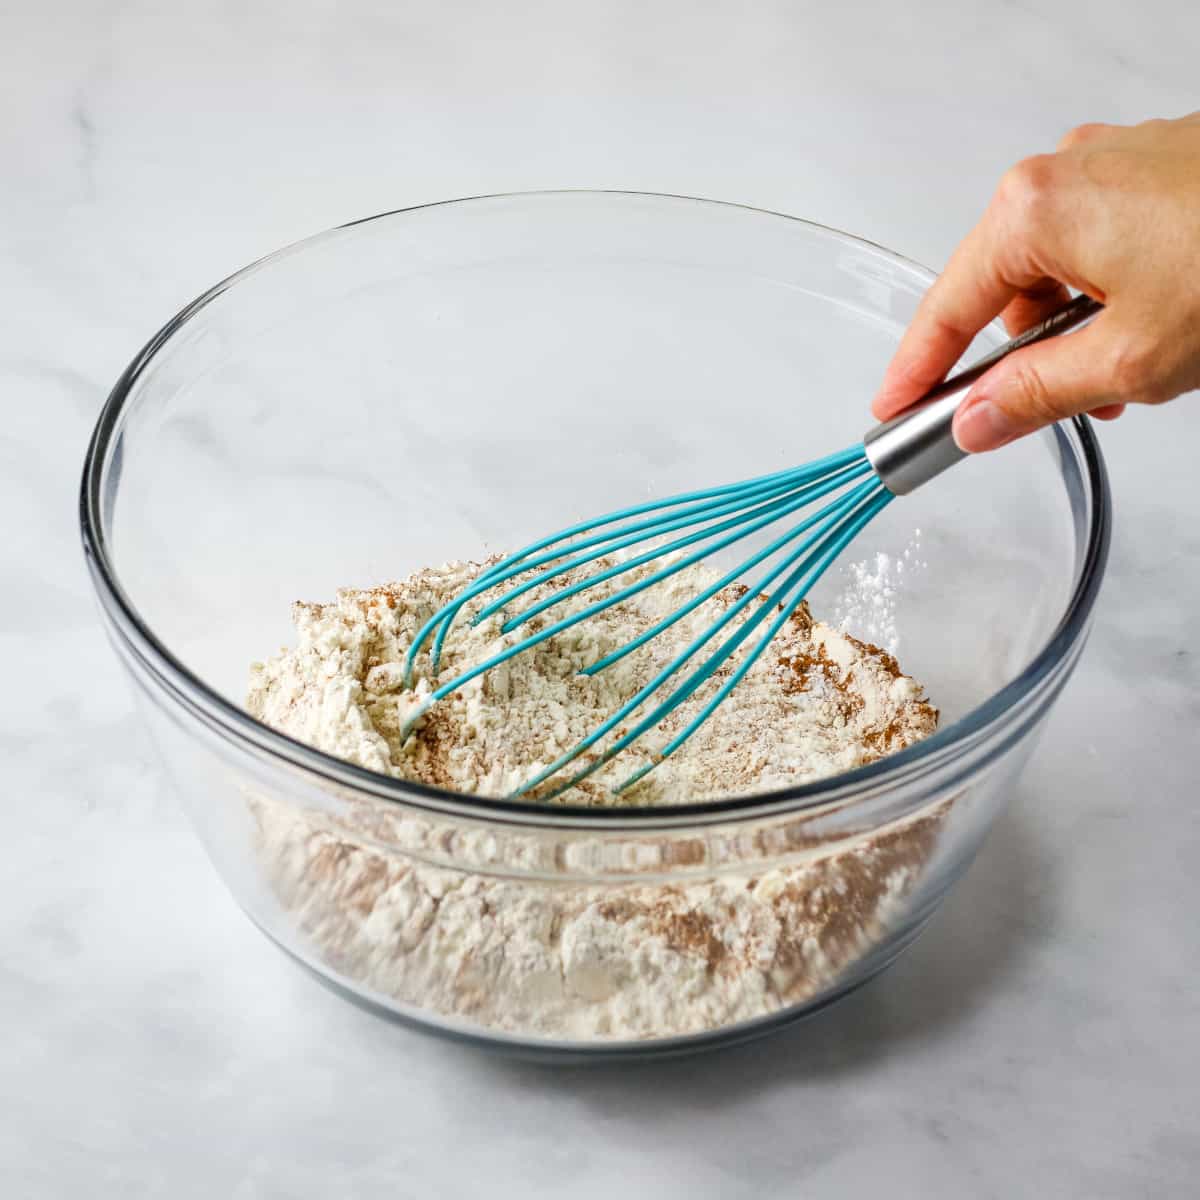 Whisking the dry ingredients together in a large glass bowl.